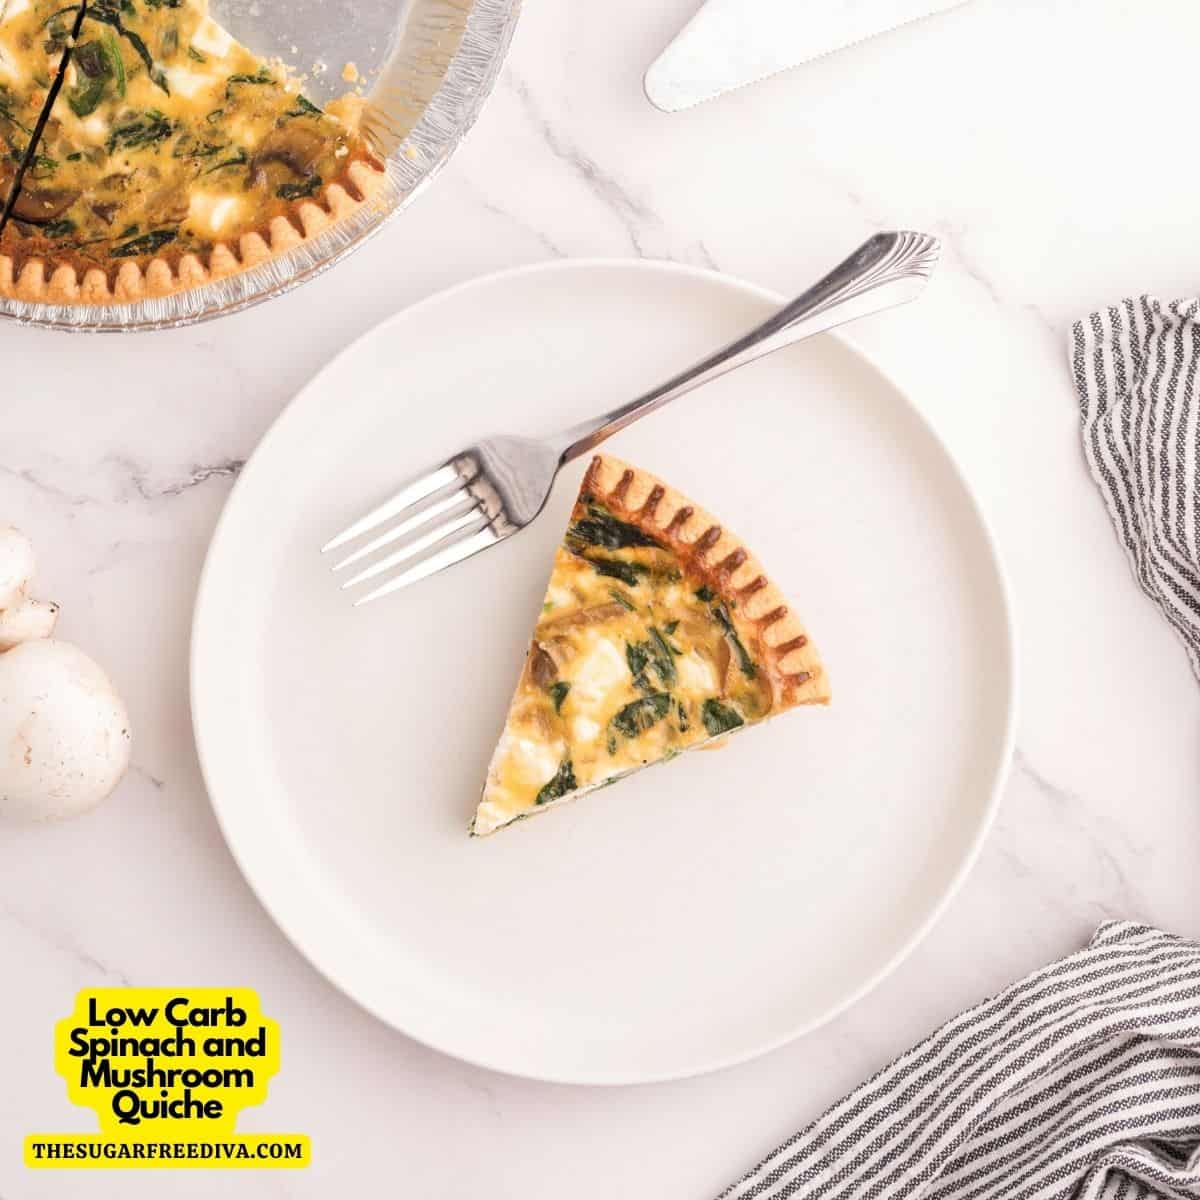 Low Carb Spinach and Mushroom Quiche, a savory and delicious breakfast or brunch egg with vegetables recipe made on a keto pie crust.